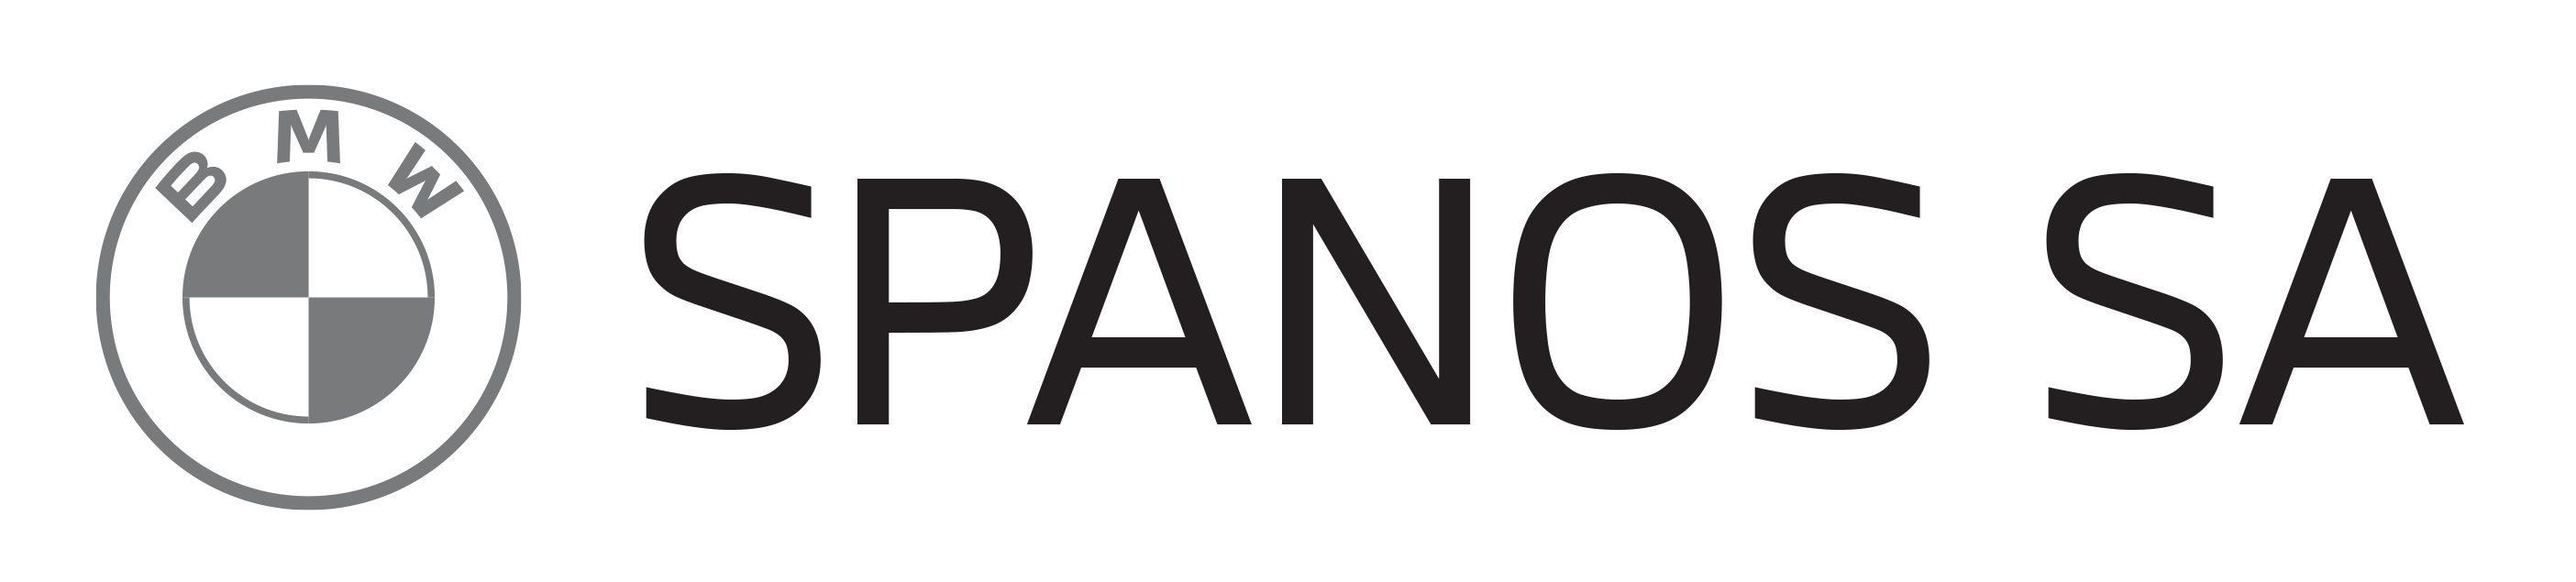 Spanos logo new bmwnext font and logo